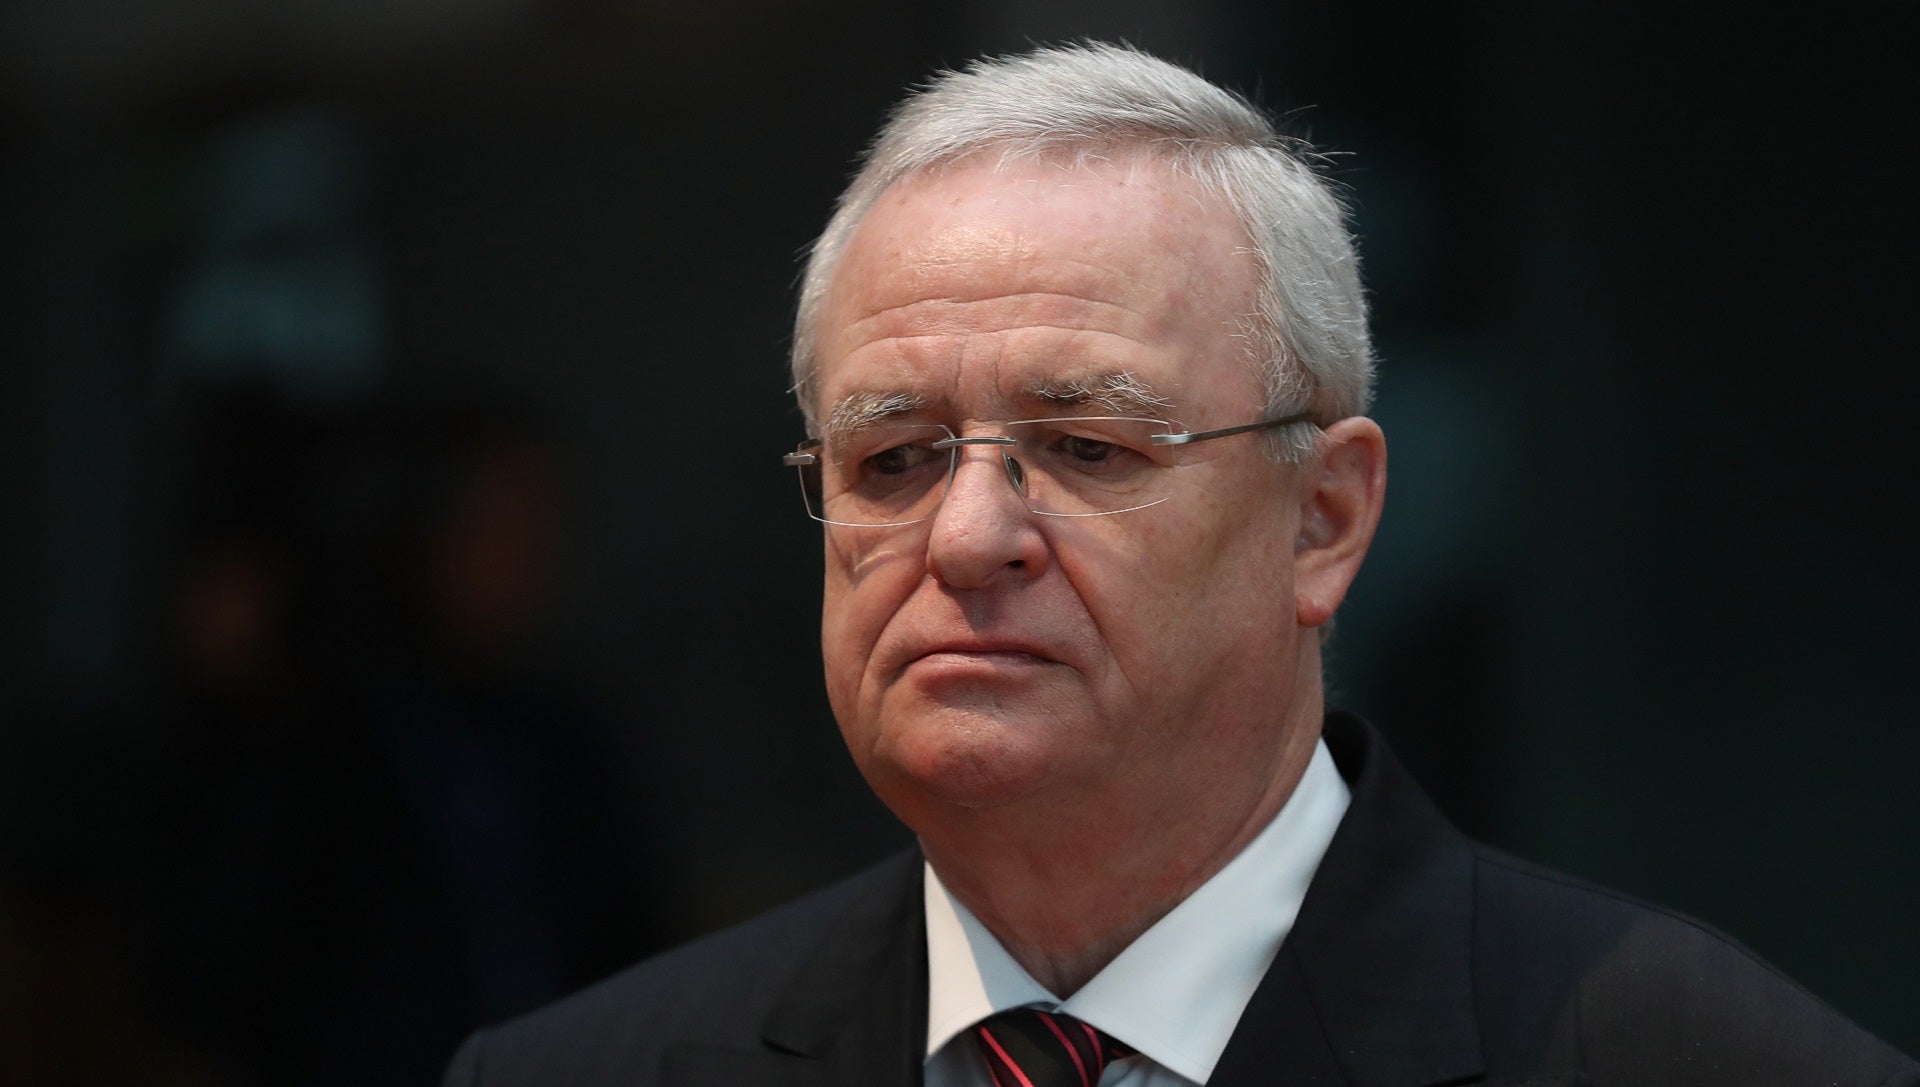 Ex-VW CEO Martin Winterkorn Officially Charged by Prosecutors With Fraud Over Diesel Emissions